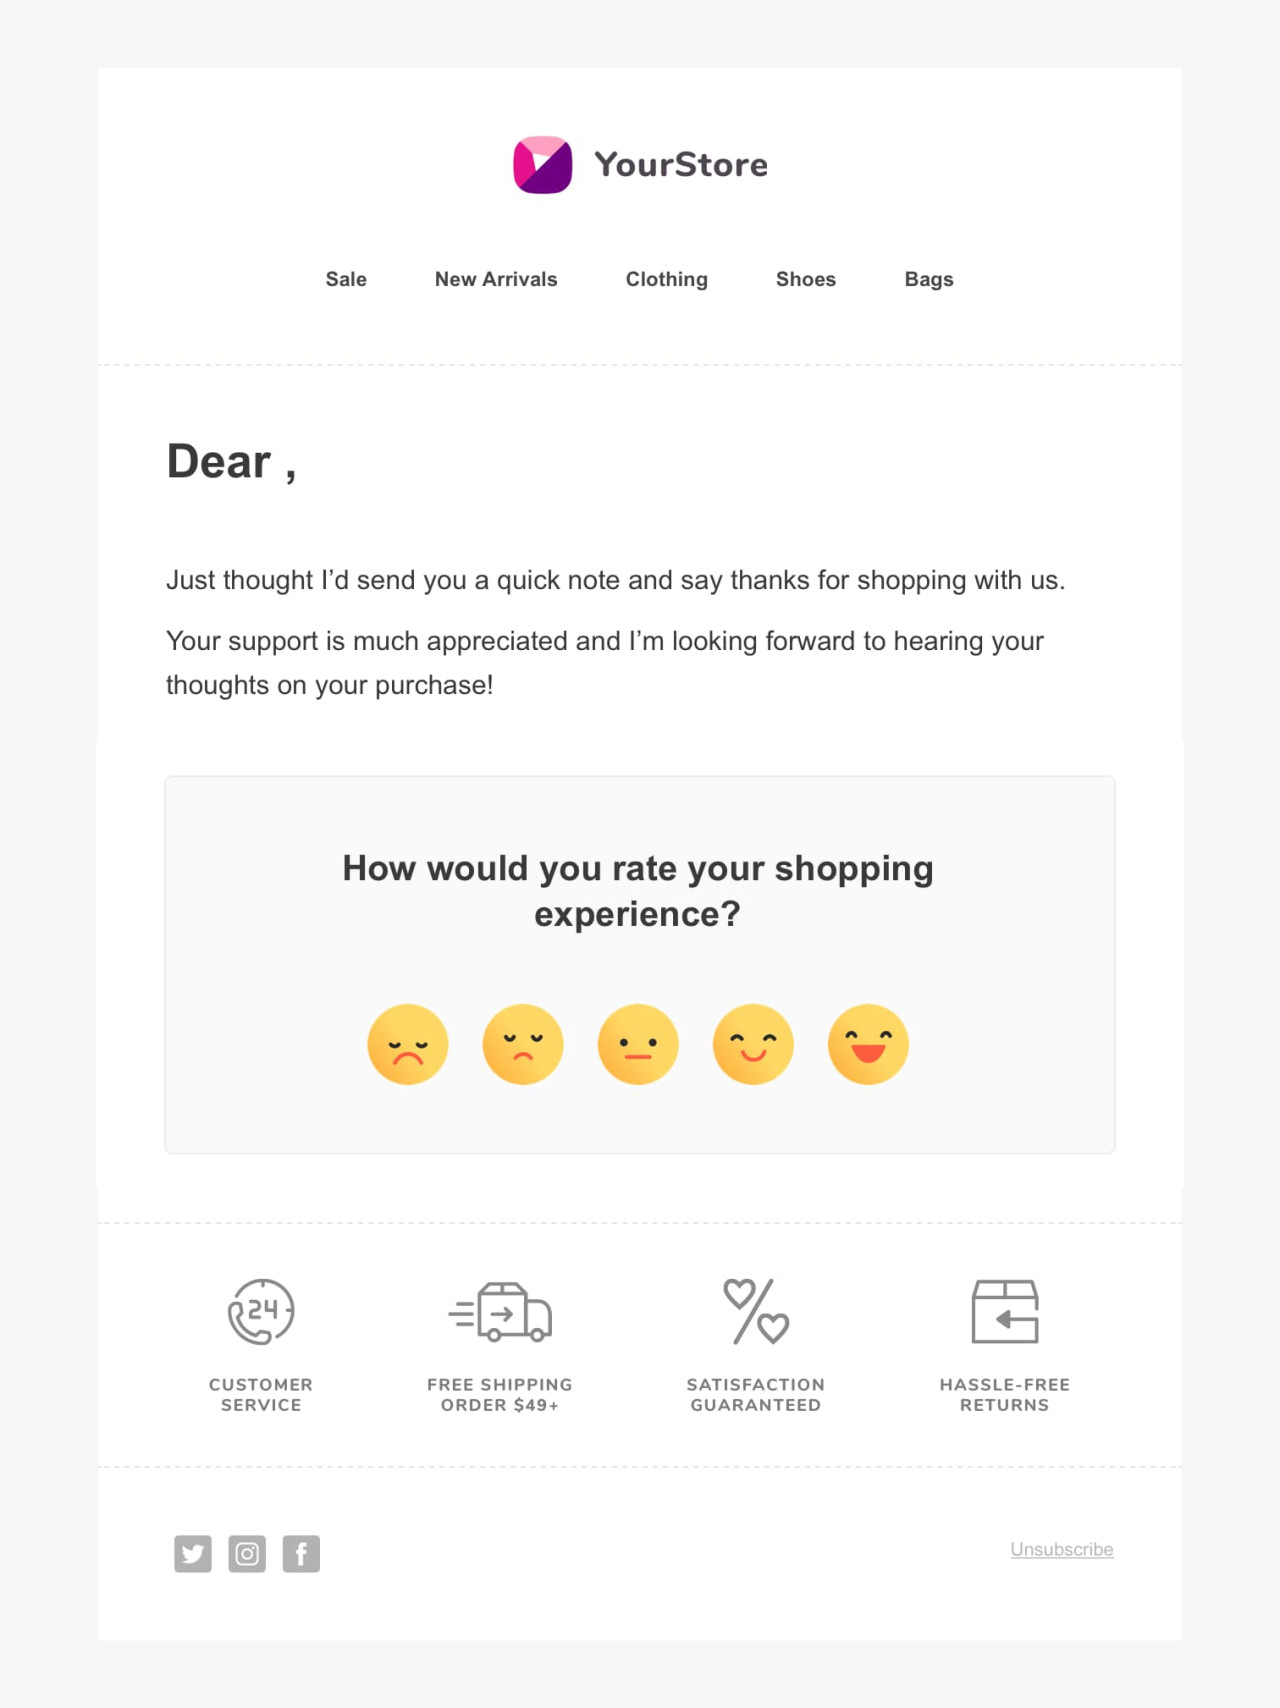 After purchase template - Made by MailerLite